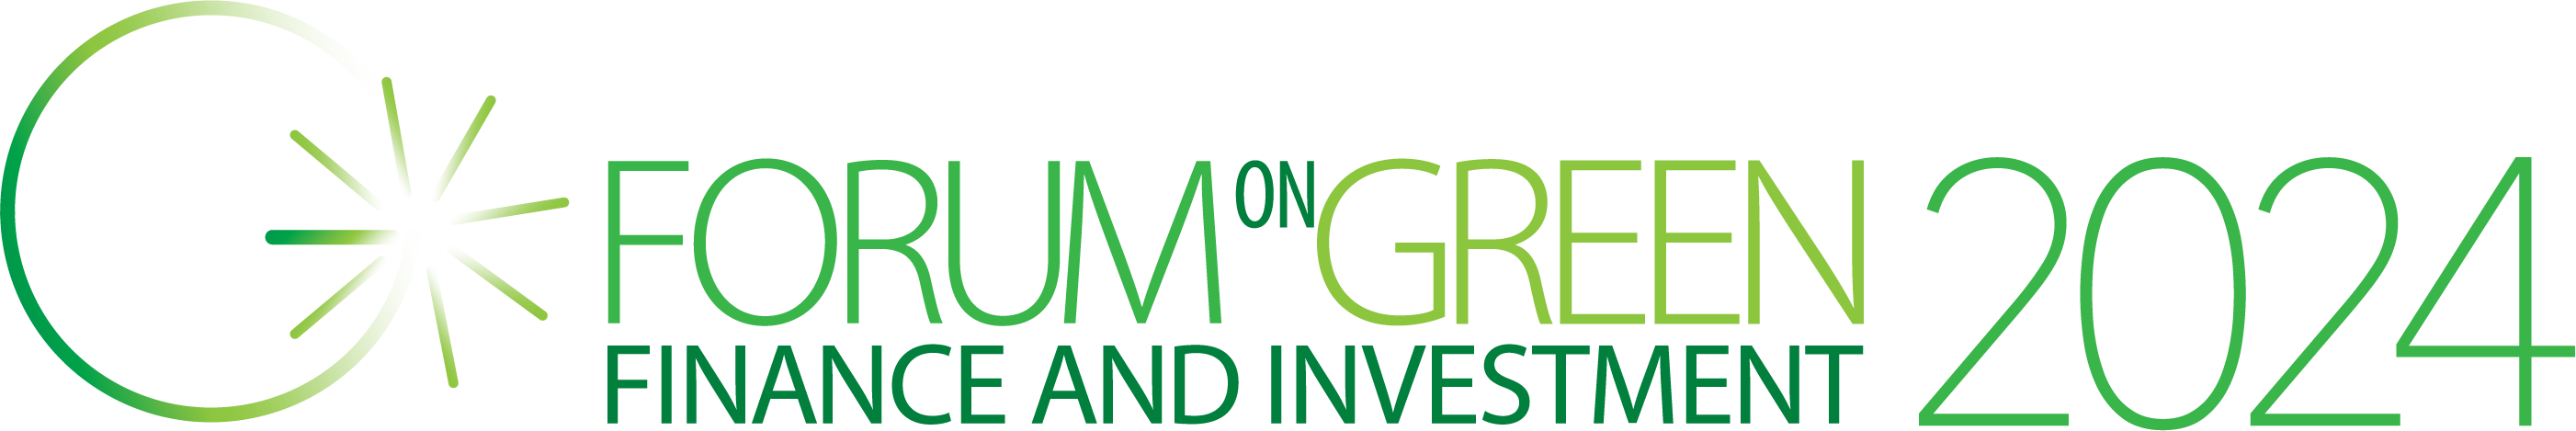 11th OECD Forum on Green Finance and Investment 